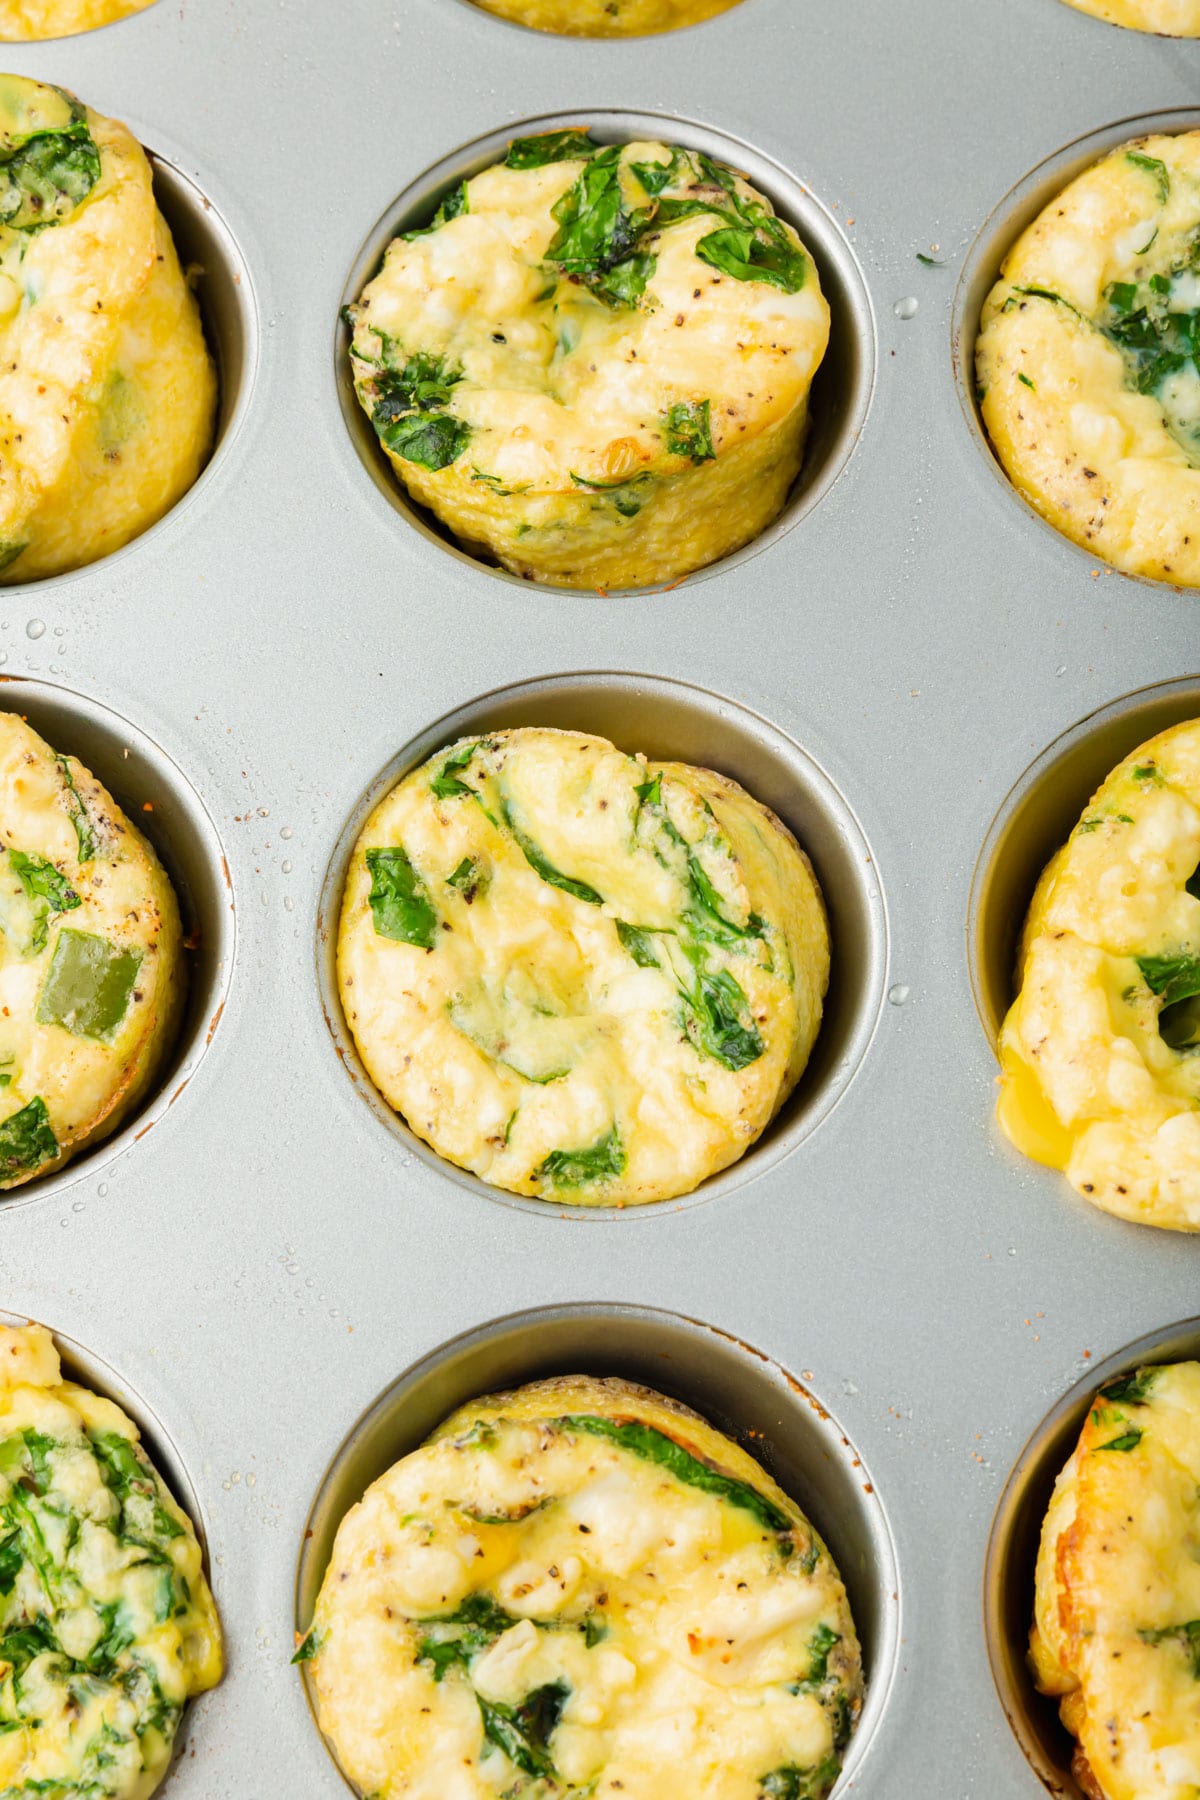 A muffin tin filled with spinach feta egg muffins.